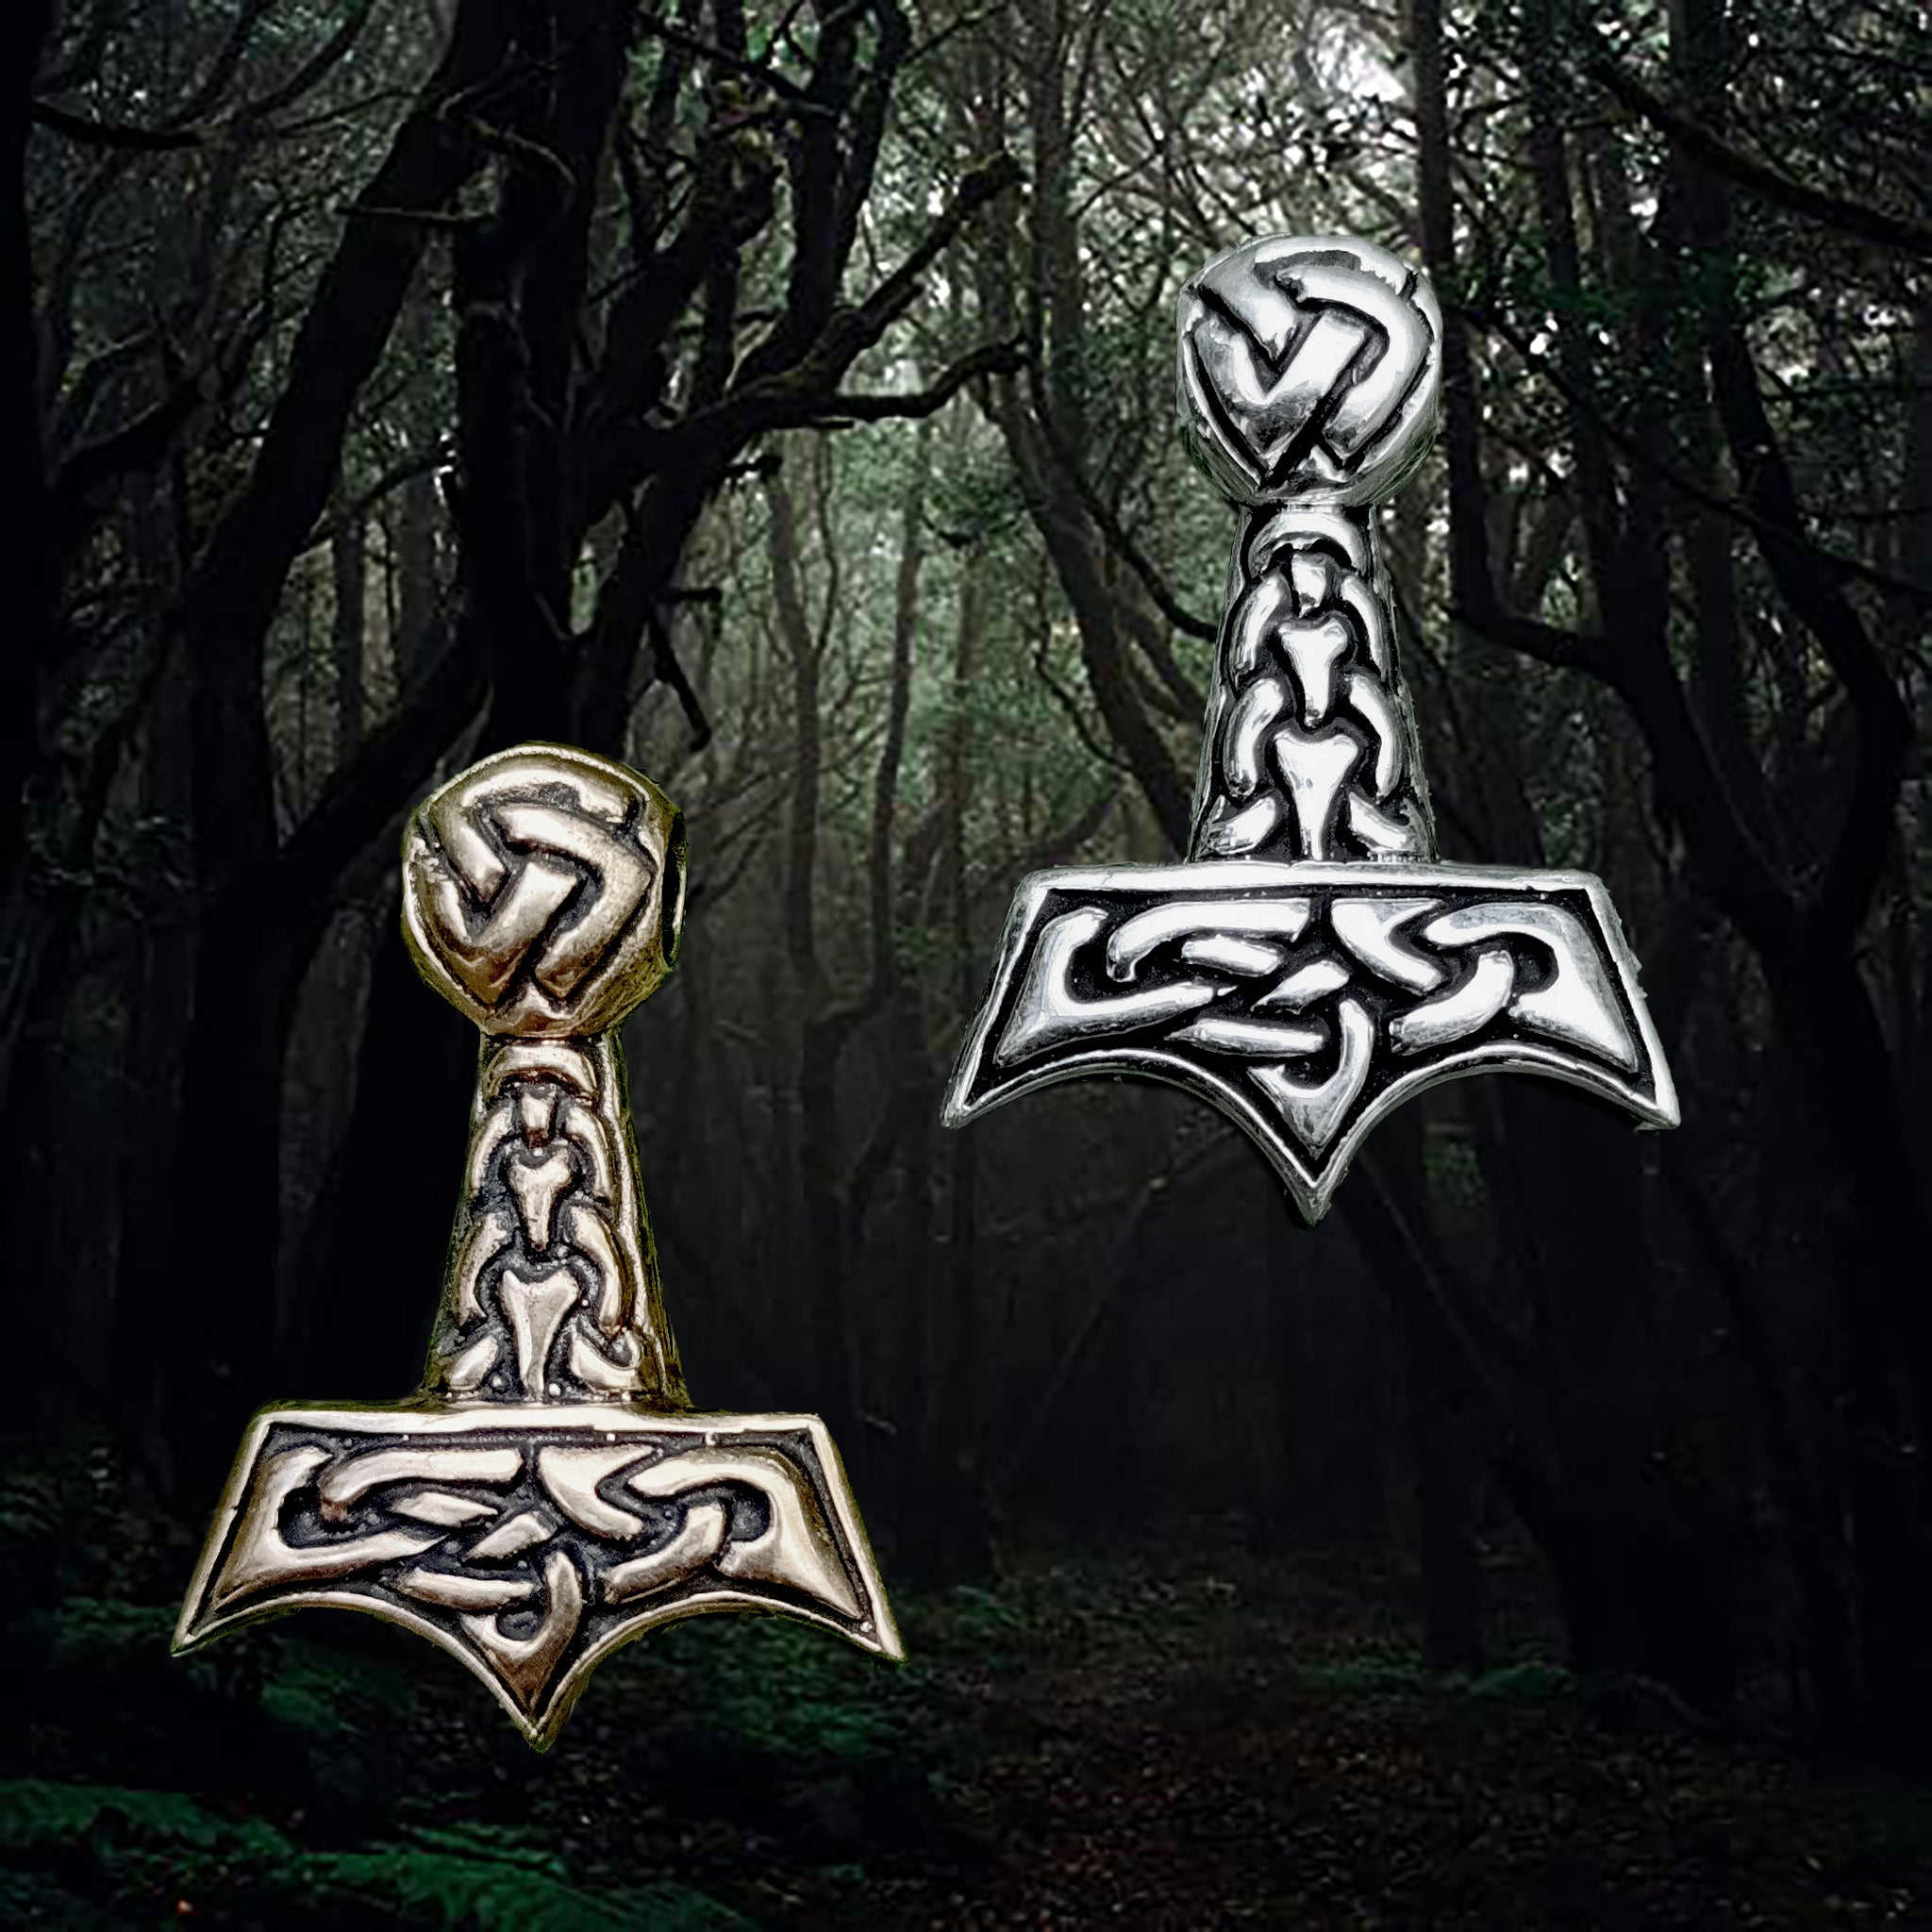 Knotwork Viking Thors Hammer Pendants in Bronze and Silver